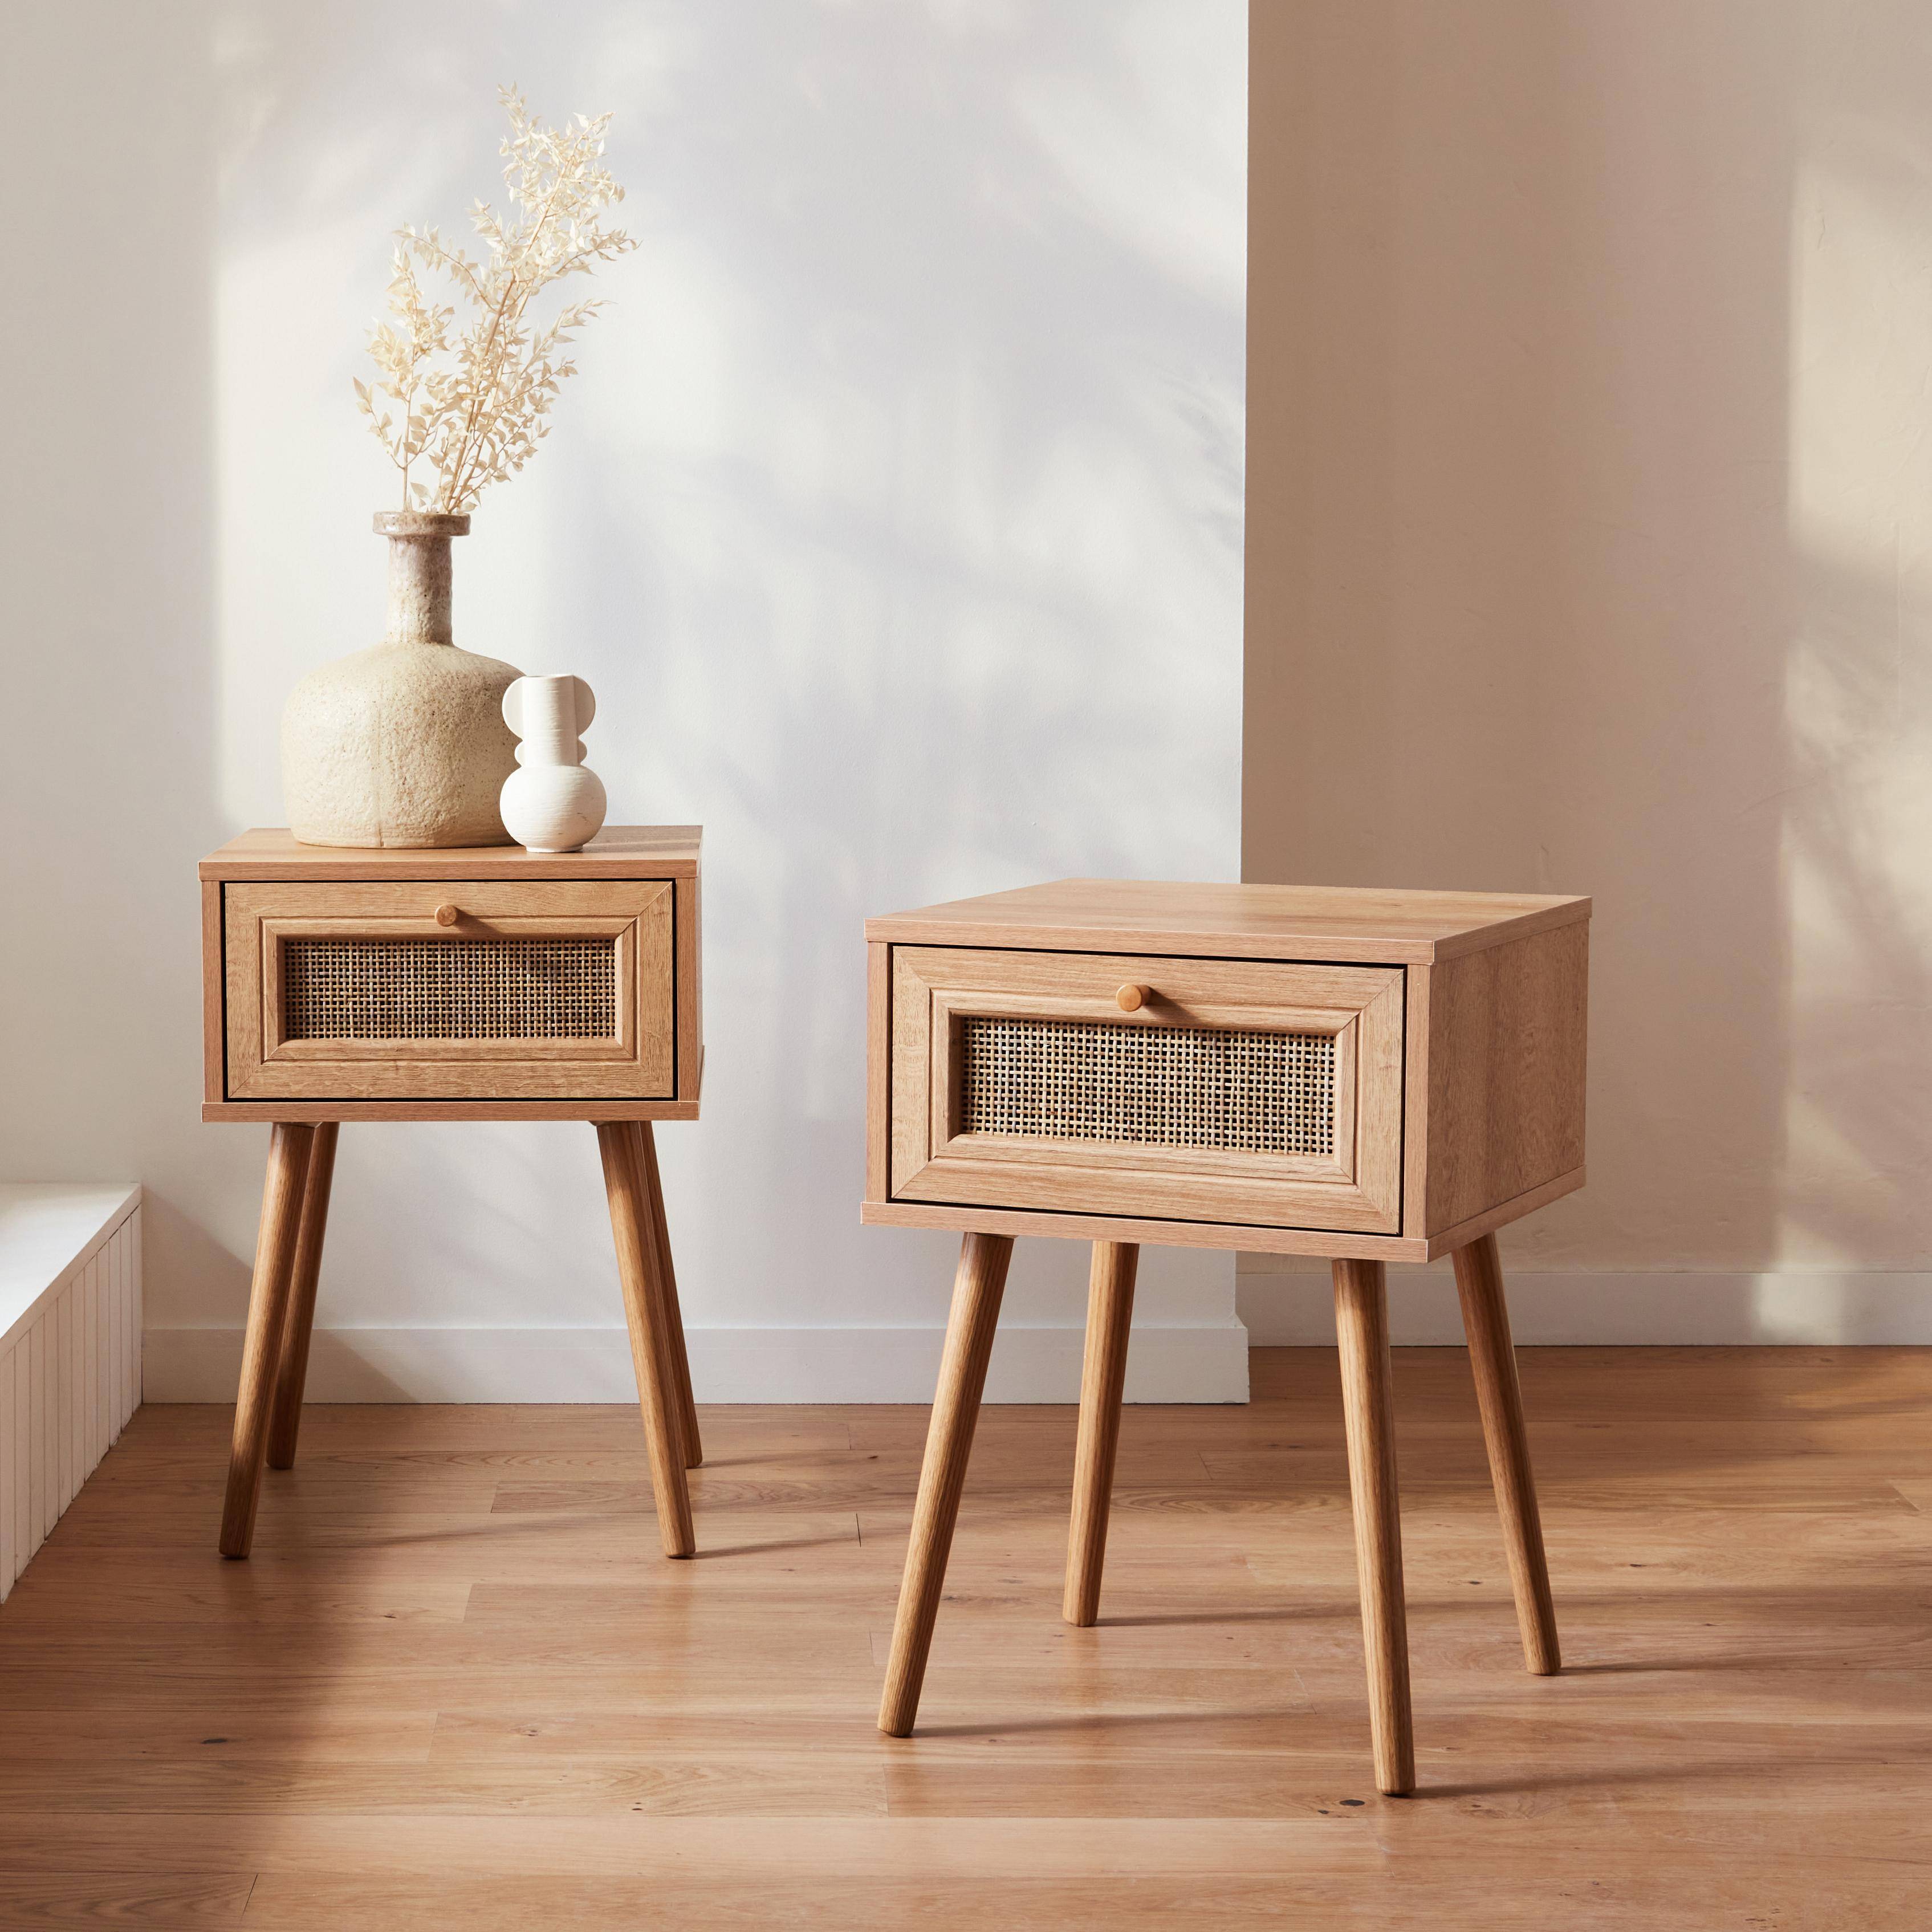 Pair of woven rattan bedside tables with drawer, 39x39x55.4cm - Boheme - Natural Wood colour Photo1